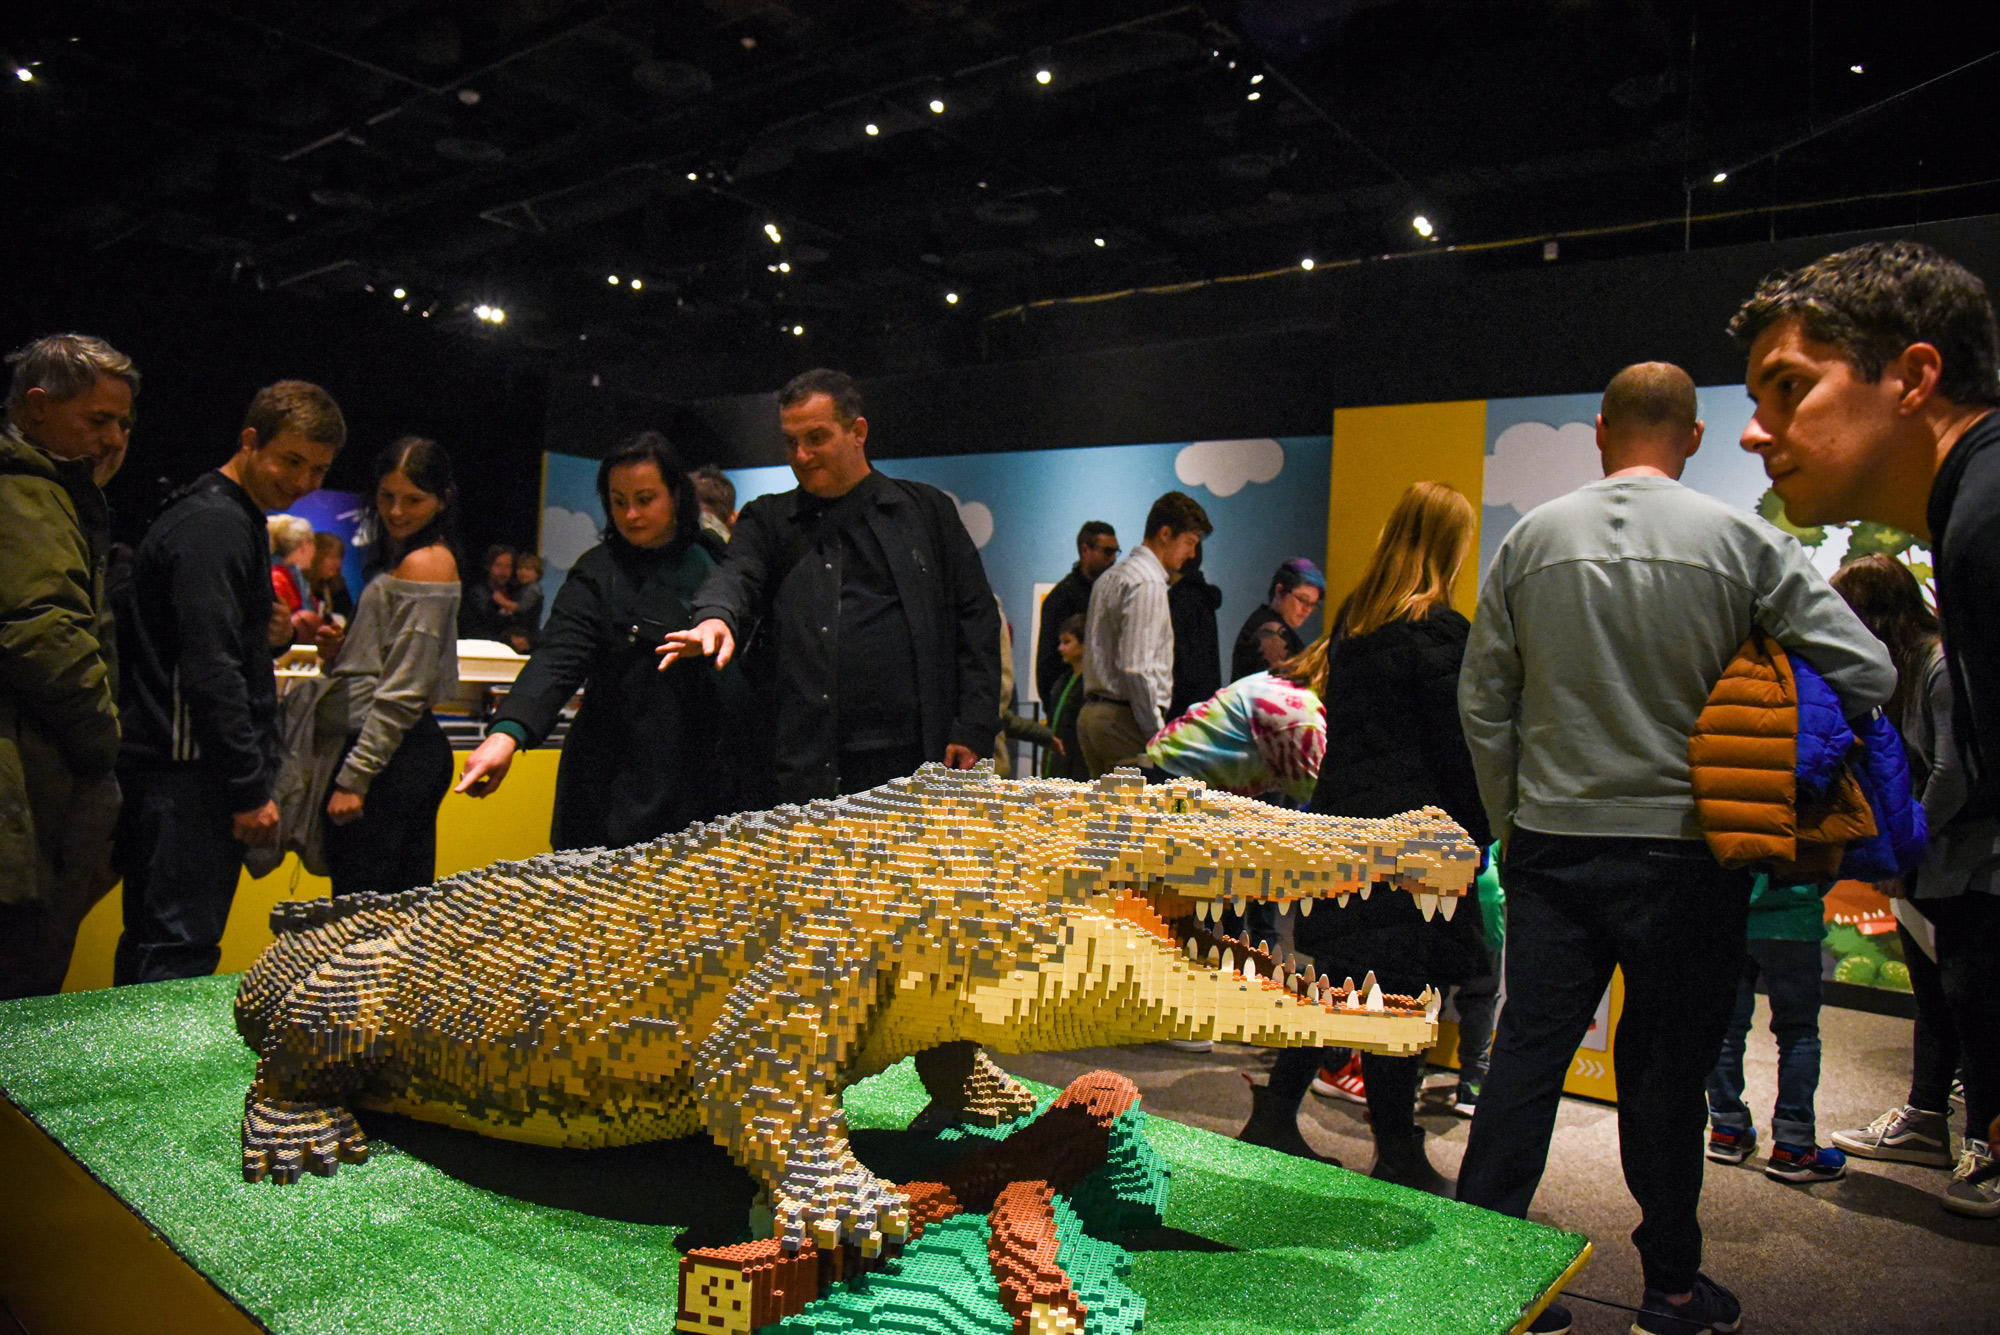 Photo from Bricktionary of alligator model